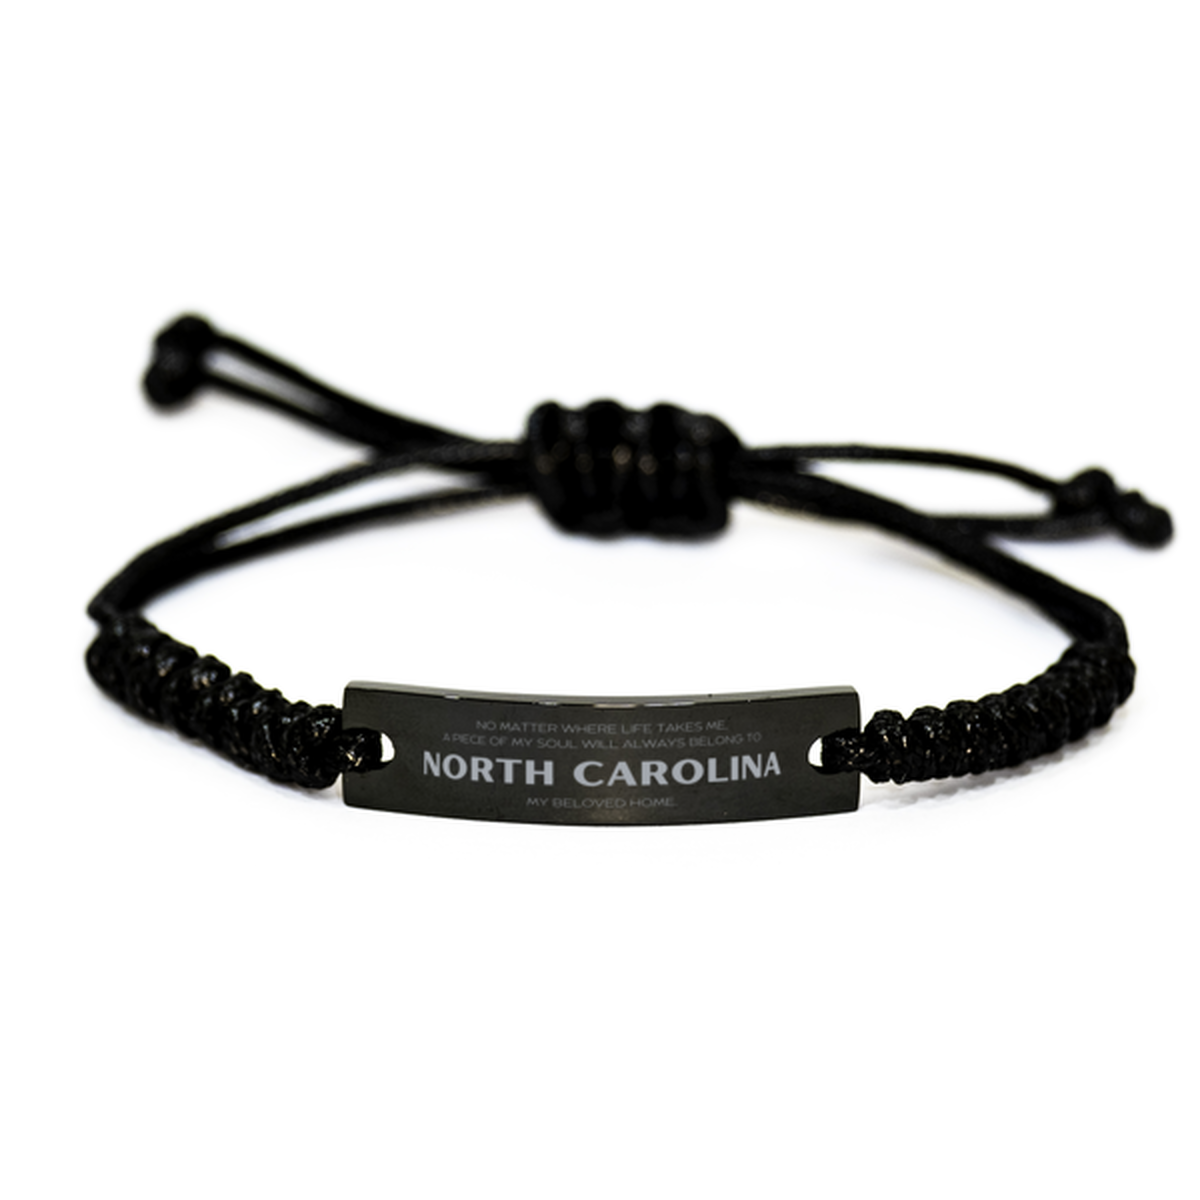 Love North Carolina State Gifts, My soul will always belong to North Carolina, Proud Black Rope Bracelet, Birthday Unique Gifts For North Carolina Men, Women, Friends